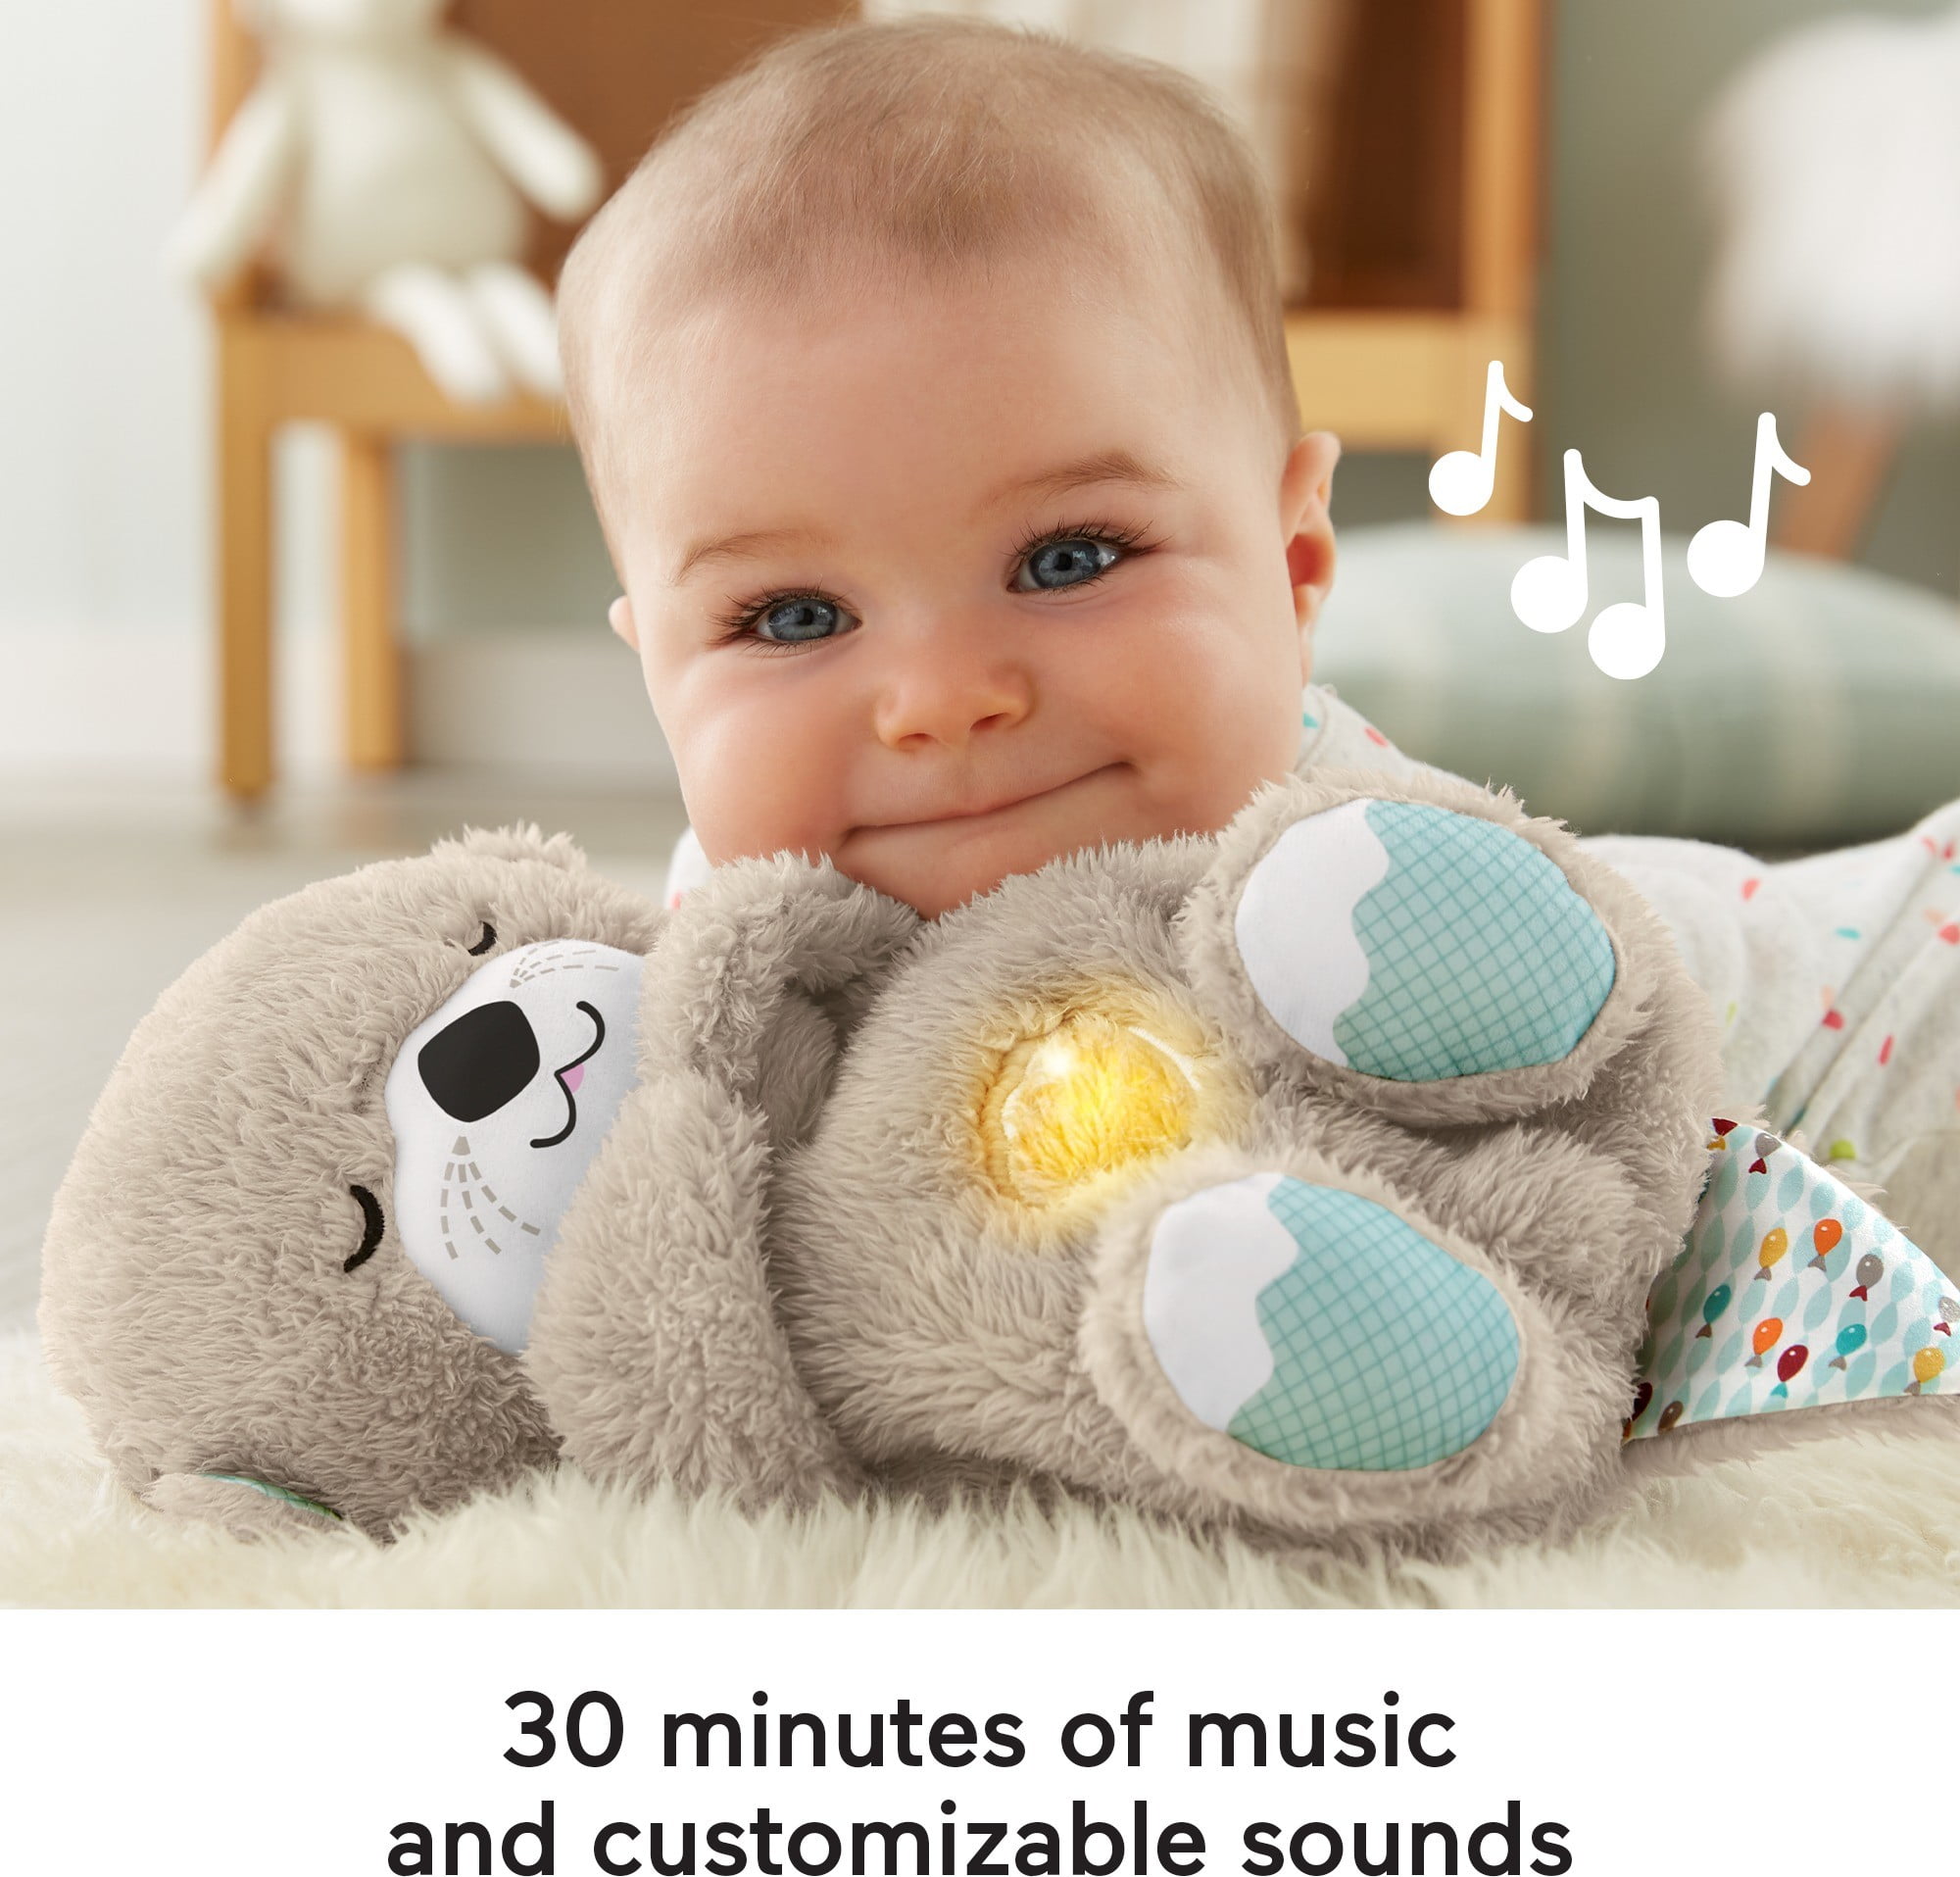 Fisher-Price Soothe 'n Snuggle Otter with Rhythmic Breathing Motions - 3